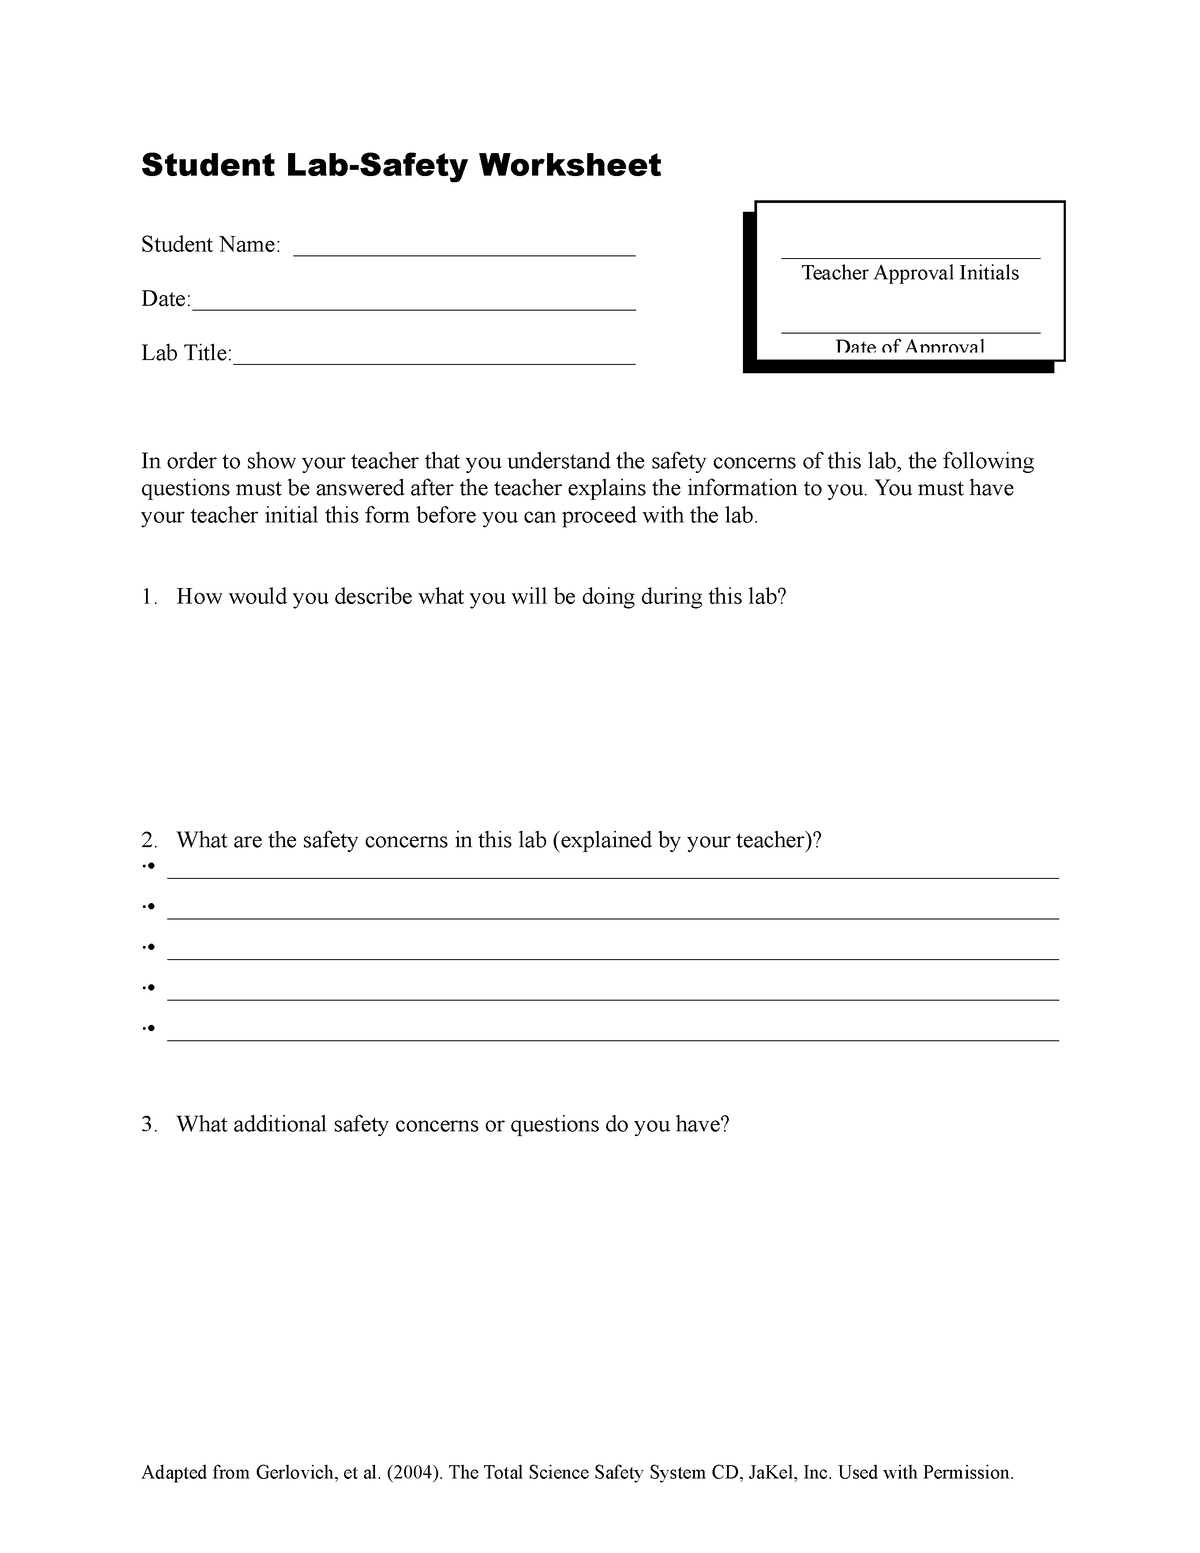 safety-worksheet-world-geography-student-lab-safety-worksheet-student-name-studocu